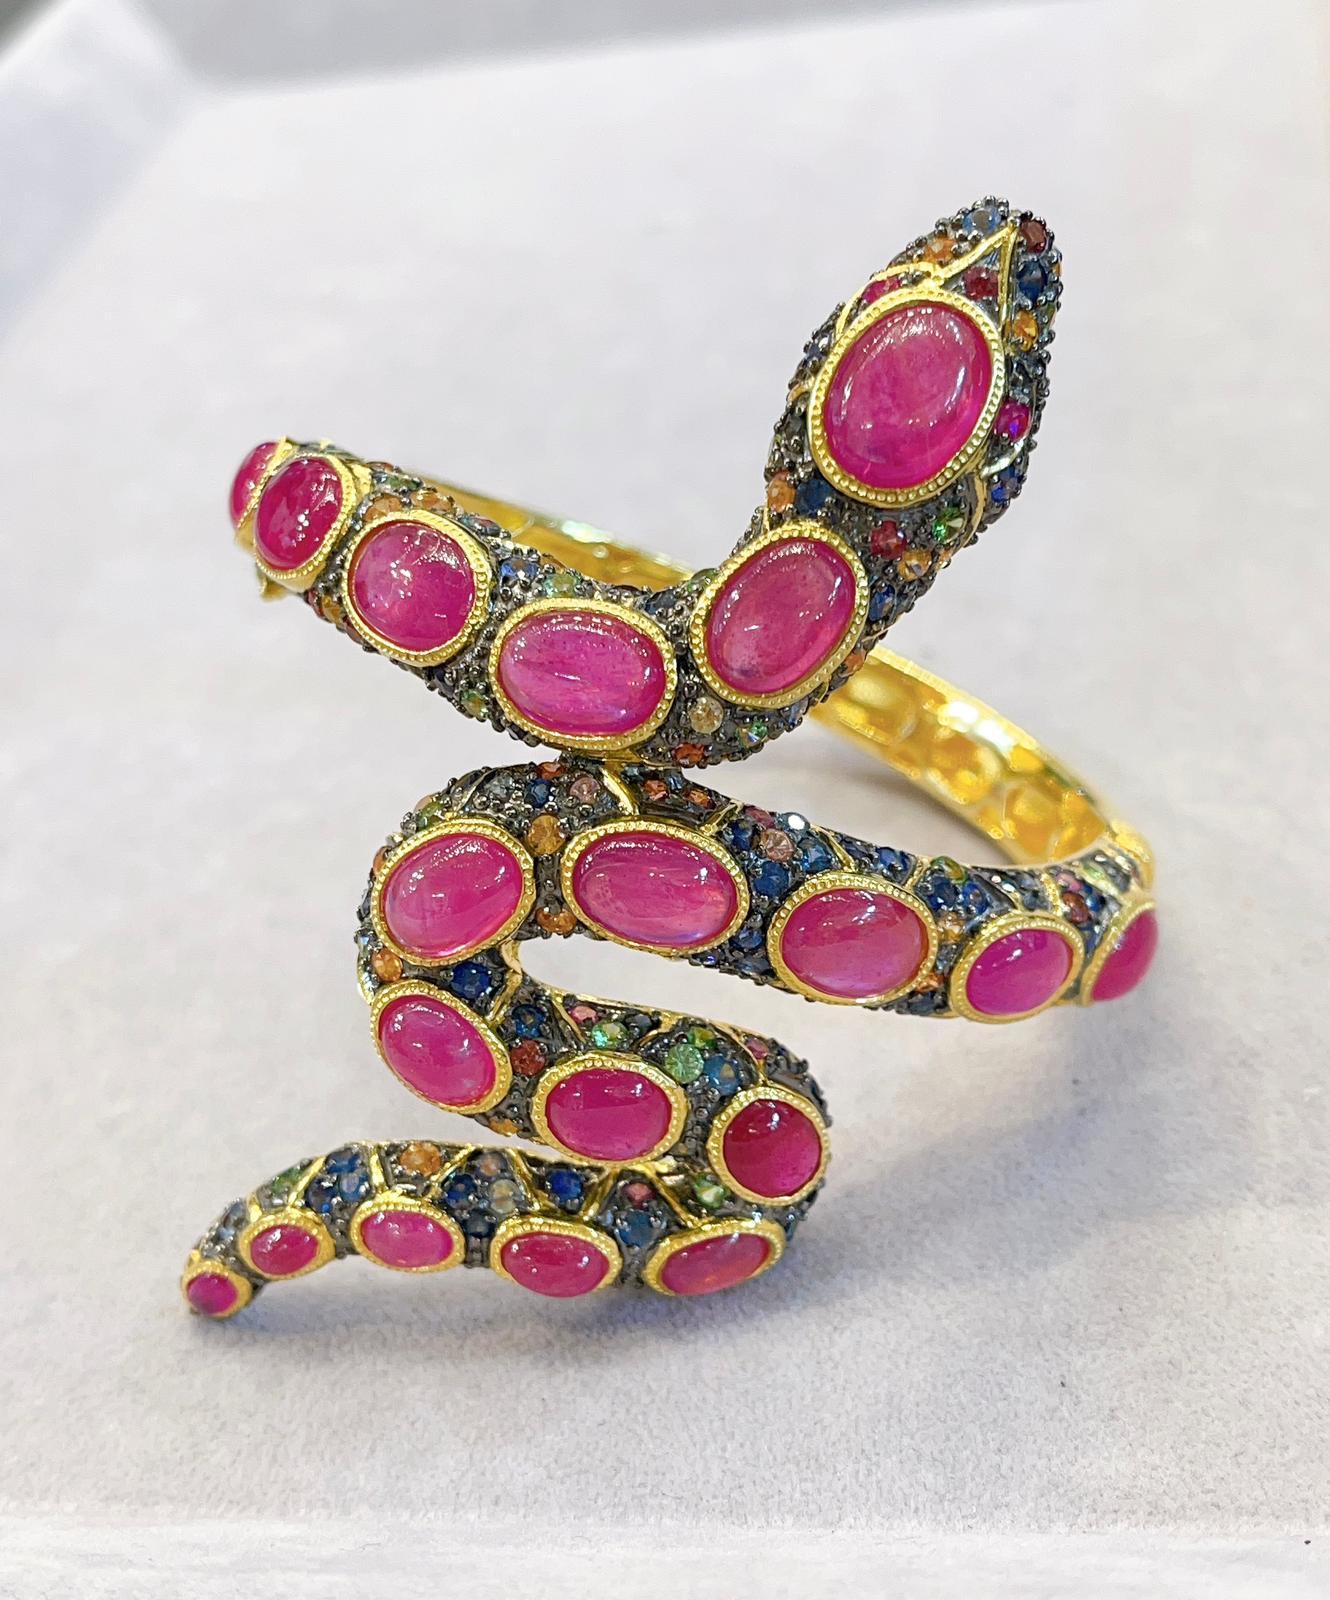 Bochic “Orient” Serpent Fancy Sapphire & Ruby bangle Set In 18K Gold & Silver 

Bochic Serpent Fancy Sapphire & Ruby Ring 
Ruby Natural Cabochon 
Pink Natural Sapphire 
Green Natural Sapphire
Rose Natural Sapphire 
Light Blue Natural Sapphire
Red